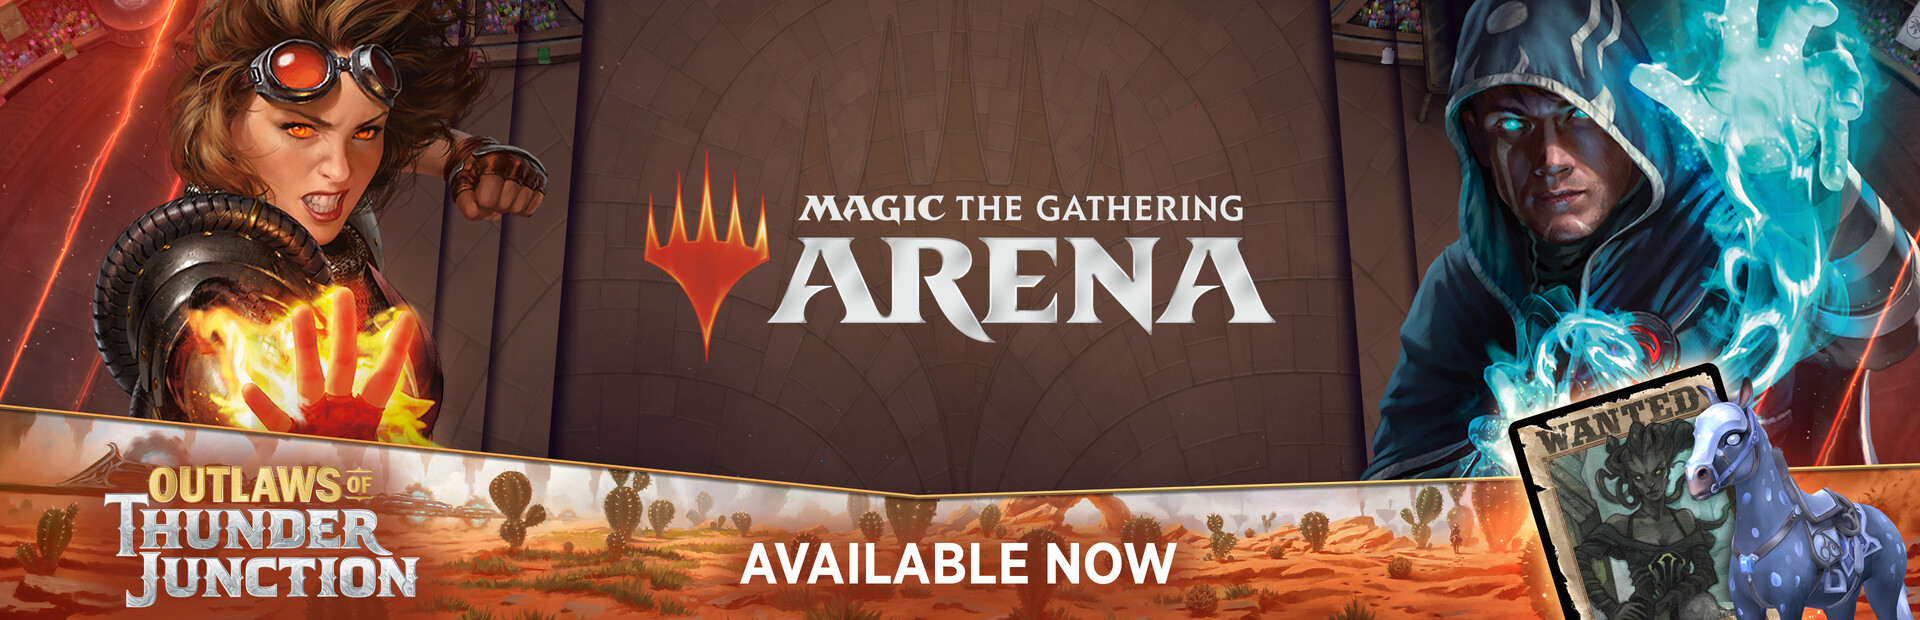 Magic: The Gathering Arena cover image